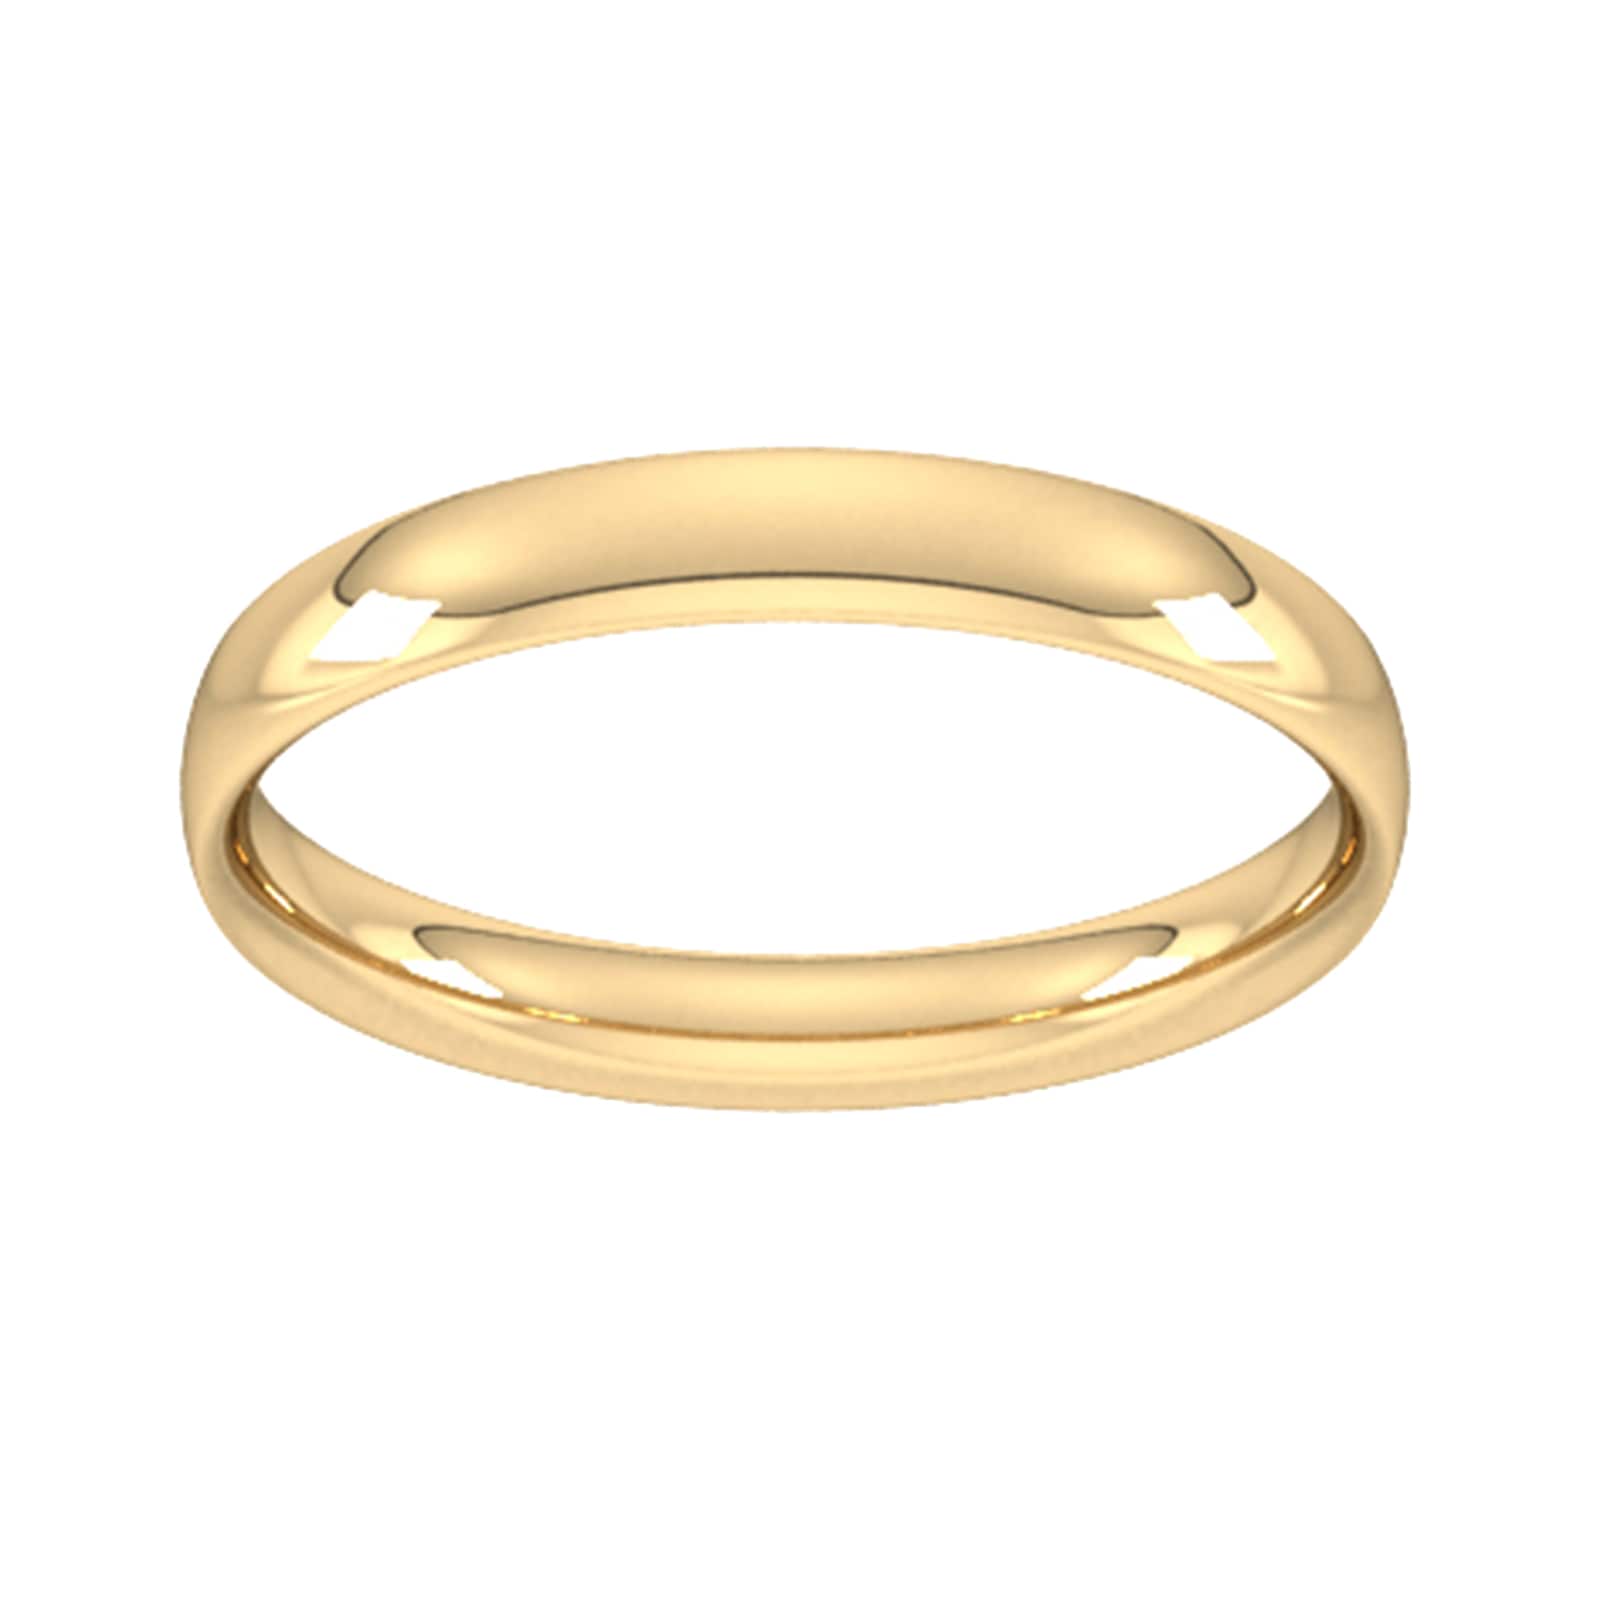 4mm Traditional Court Standard Wedding Ring In 18 Carat Yellow Gold - Ring Size T